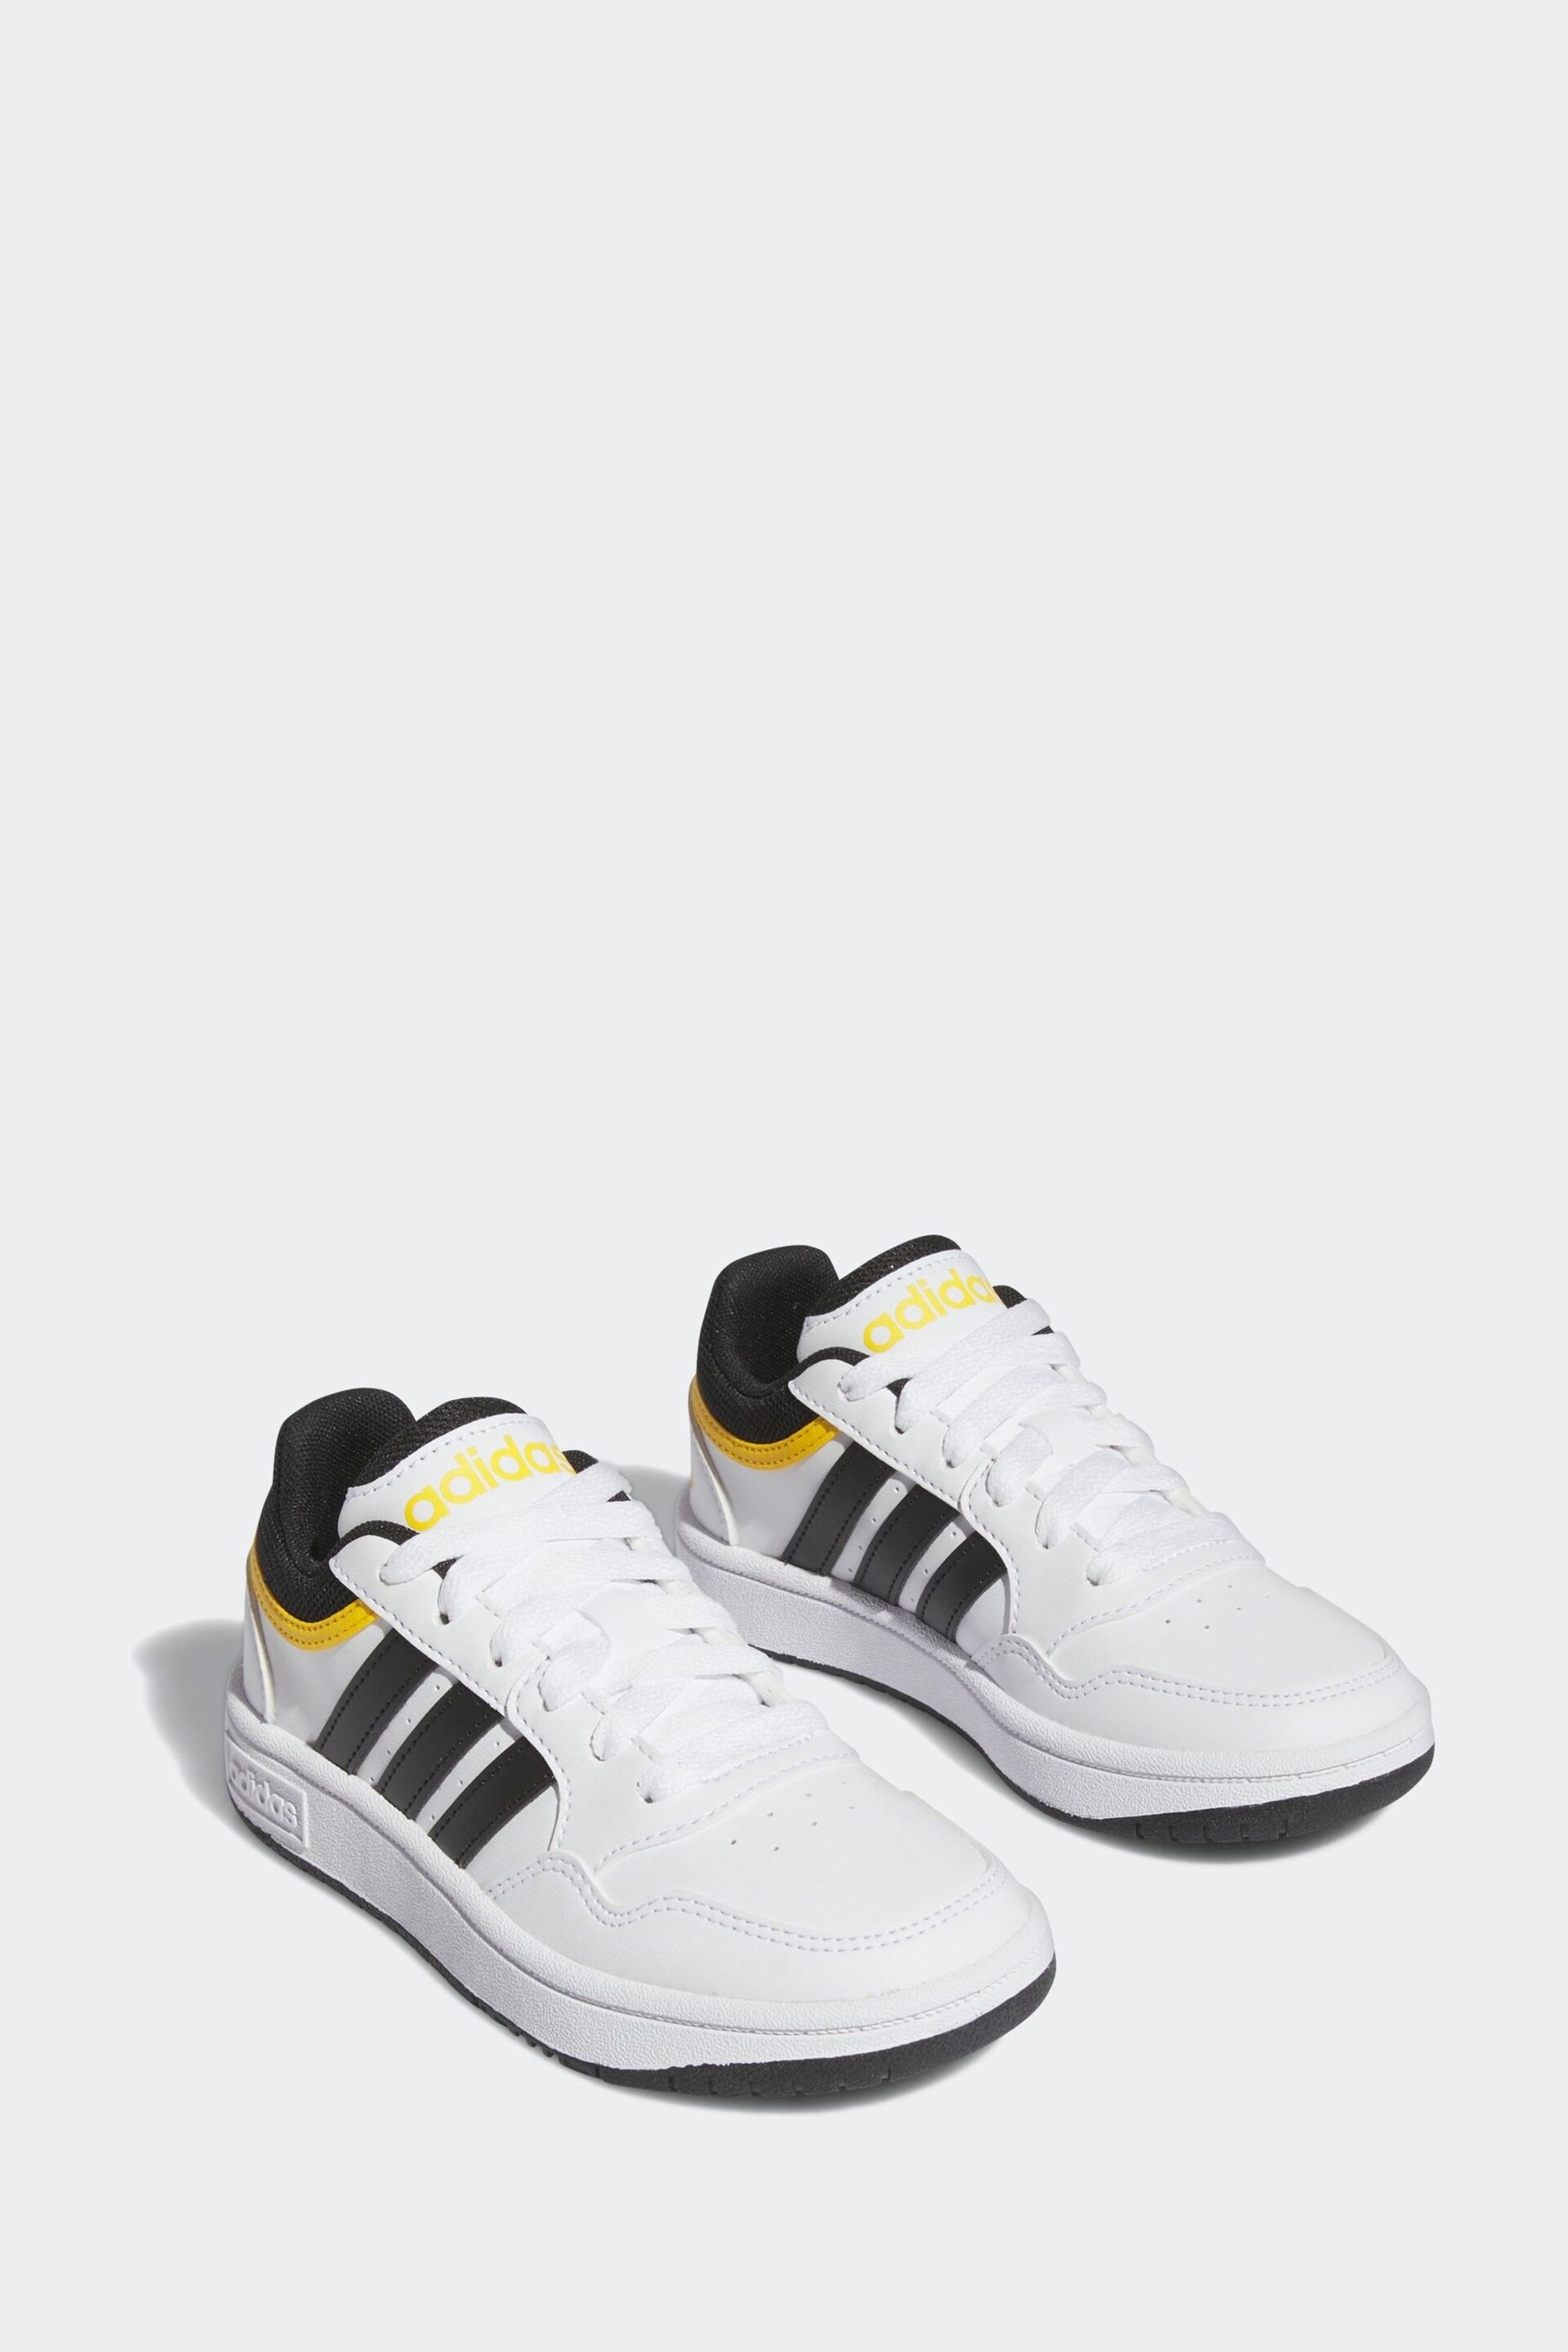 adidas Yellow/Black Hoops Trainers - Image 3 of 8